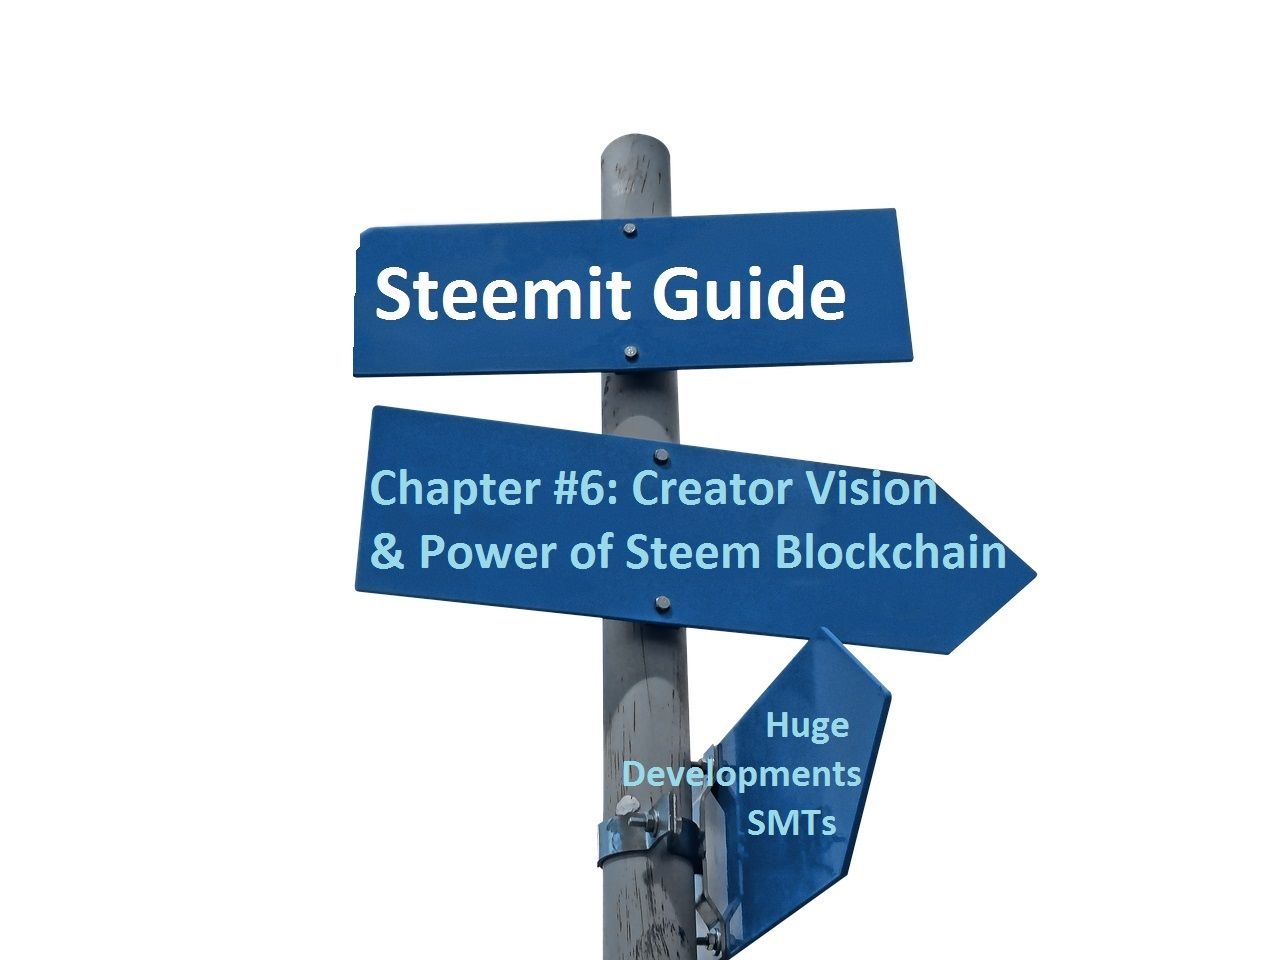 Steemit Guide Chapters - Steem Blockchain - Chapter 6 Vision of Creator and Power of Steemit.jpg